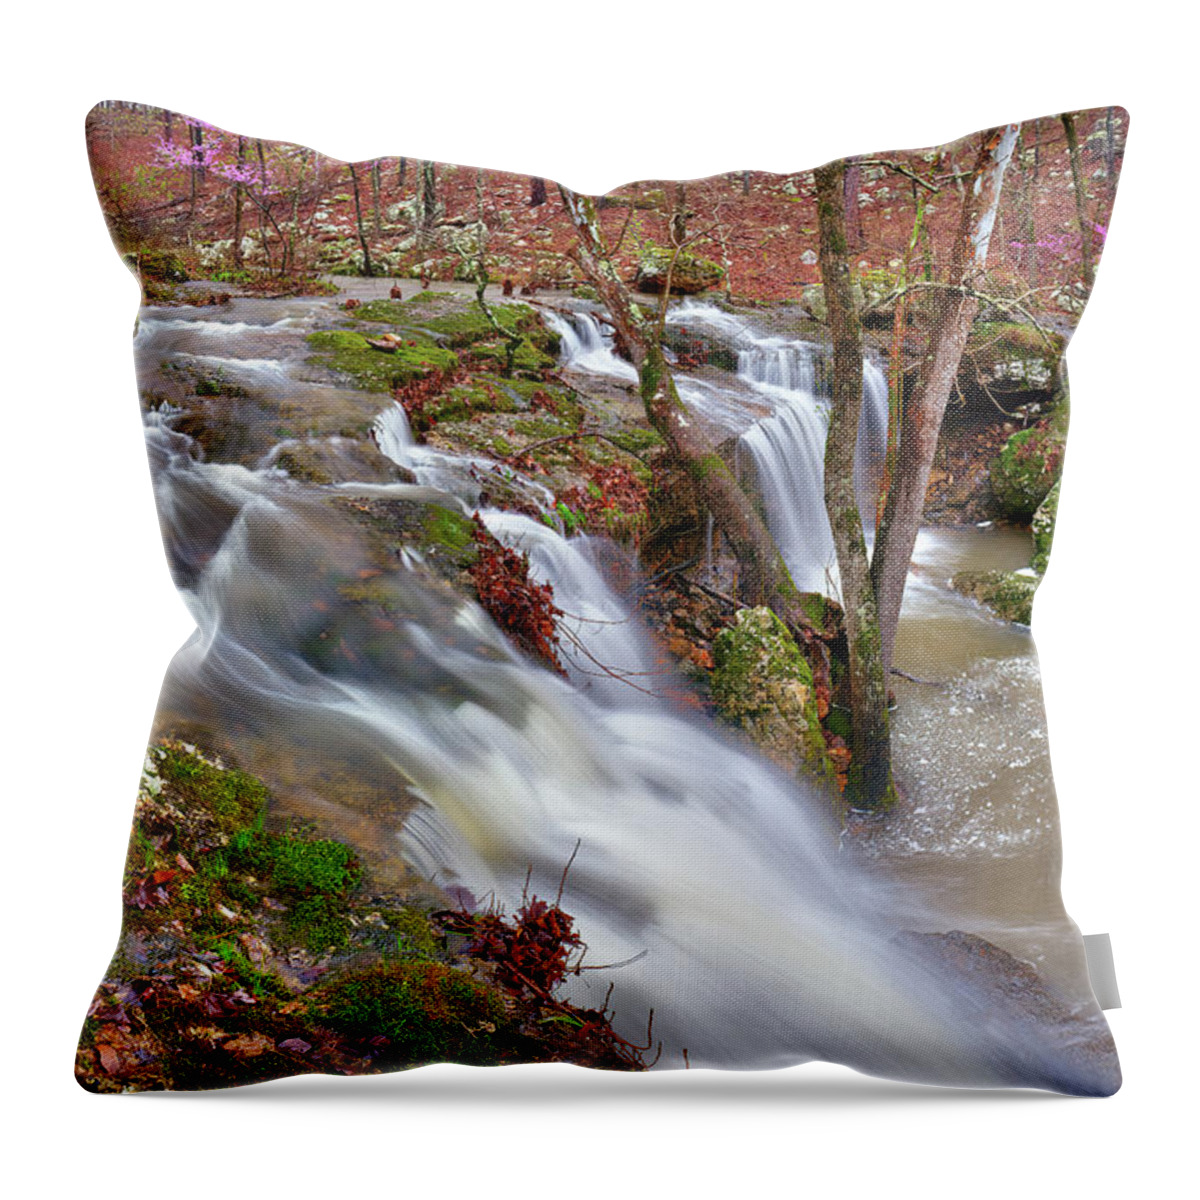 Waterfall Throw Pillow featuring the photograph Coward's Hollow Shut-ins I by Robert Charity